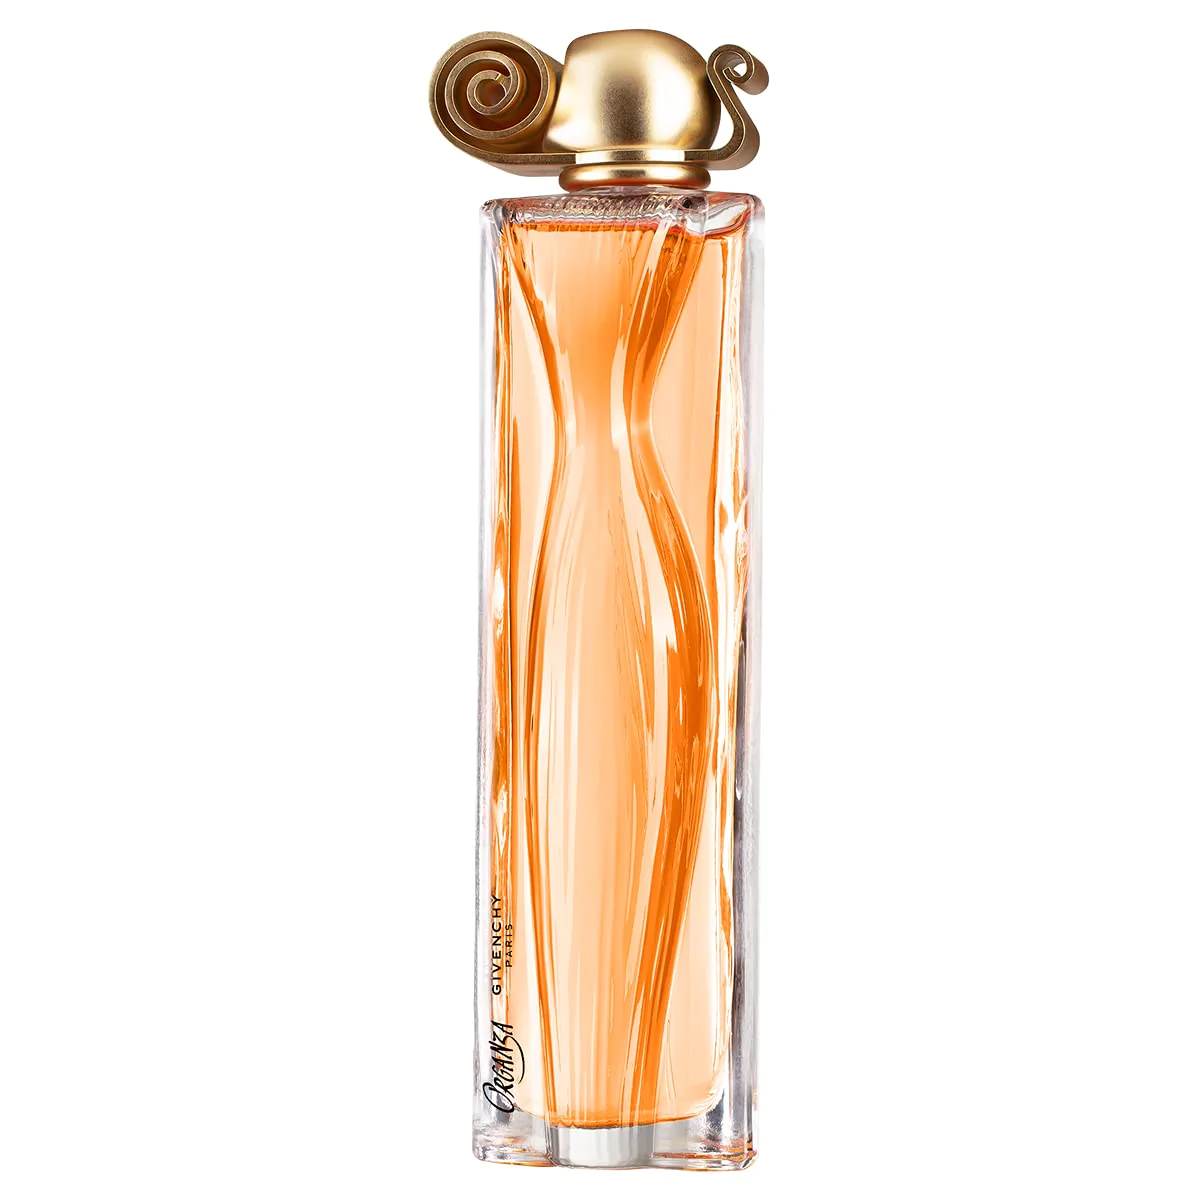 GIVENCHY ORGANZA EDP 100ML - Price In Pakistan